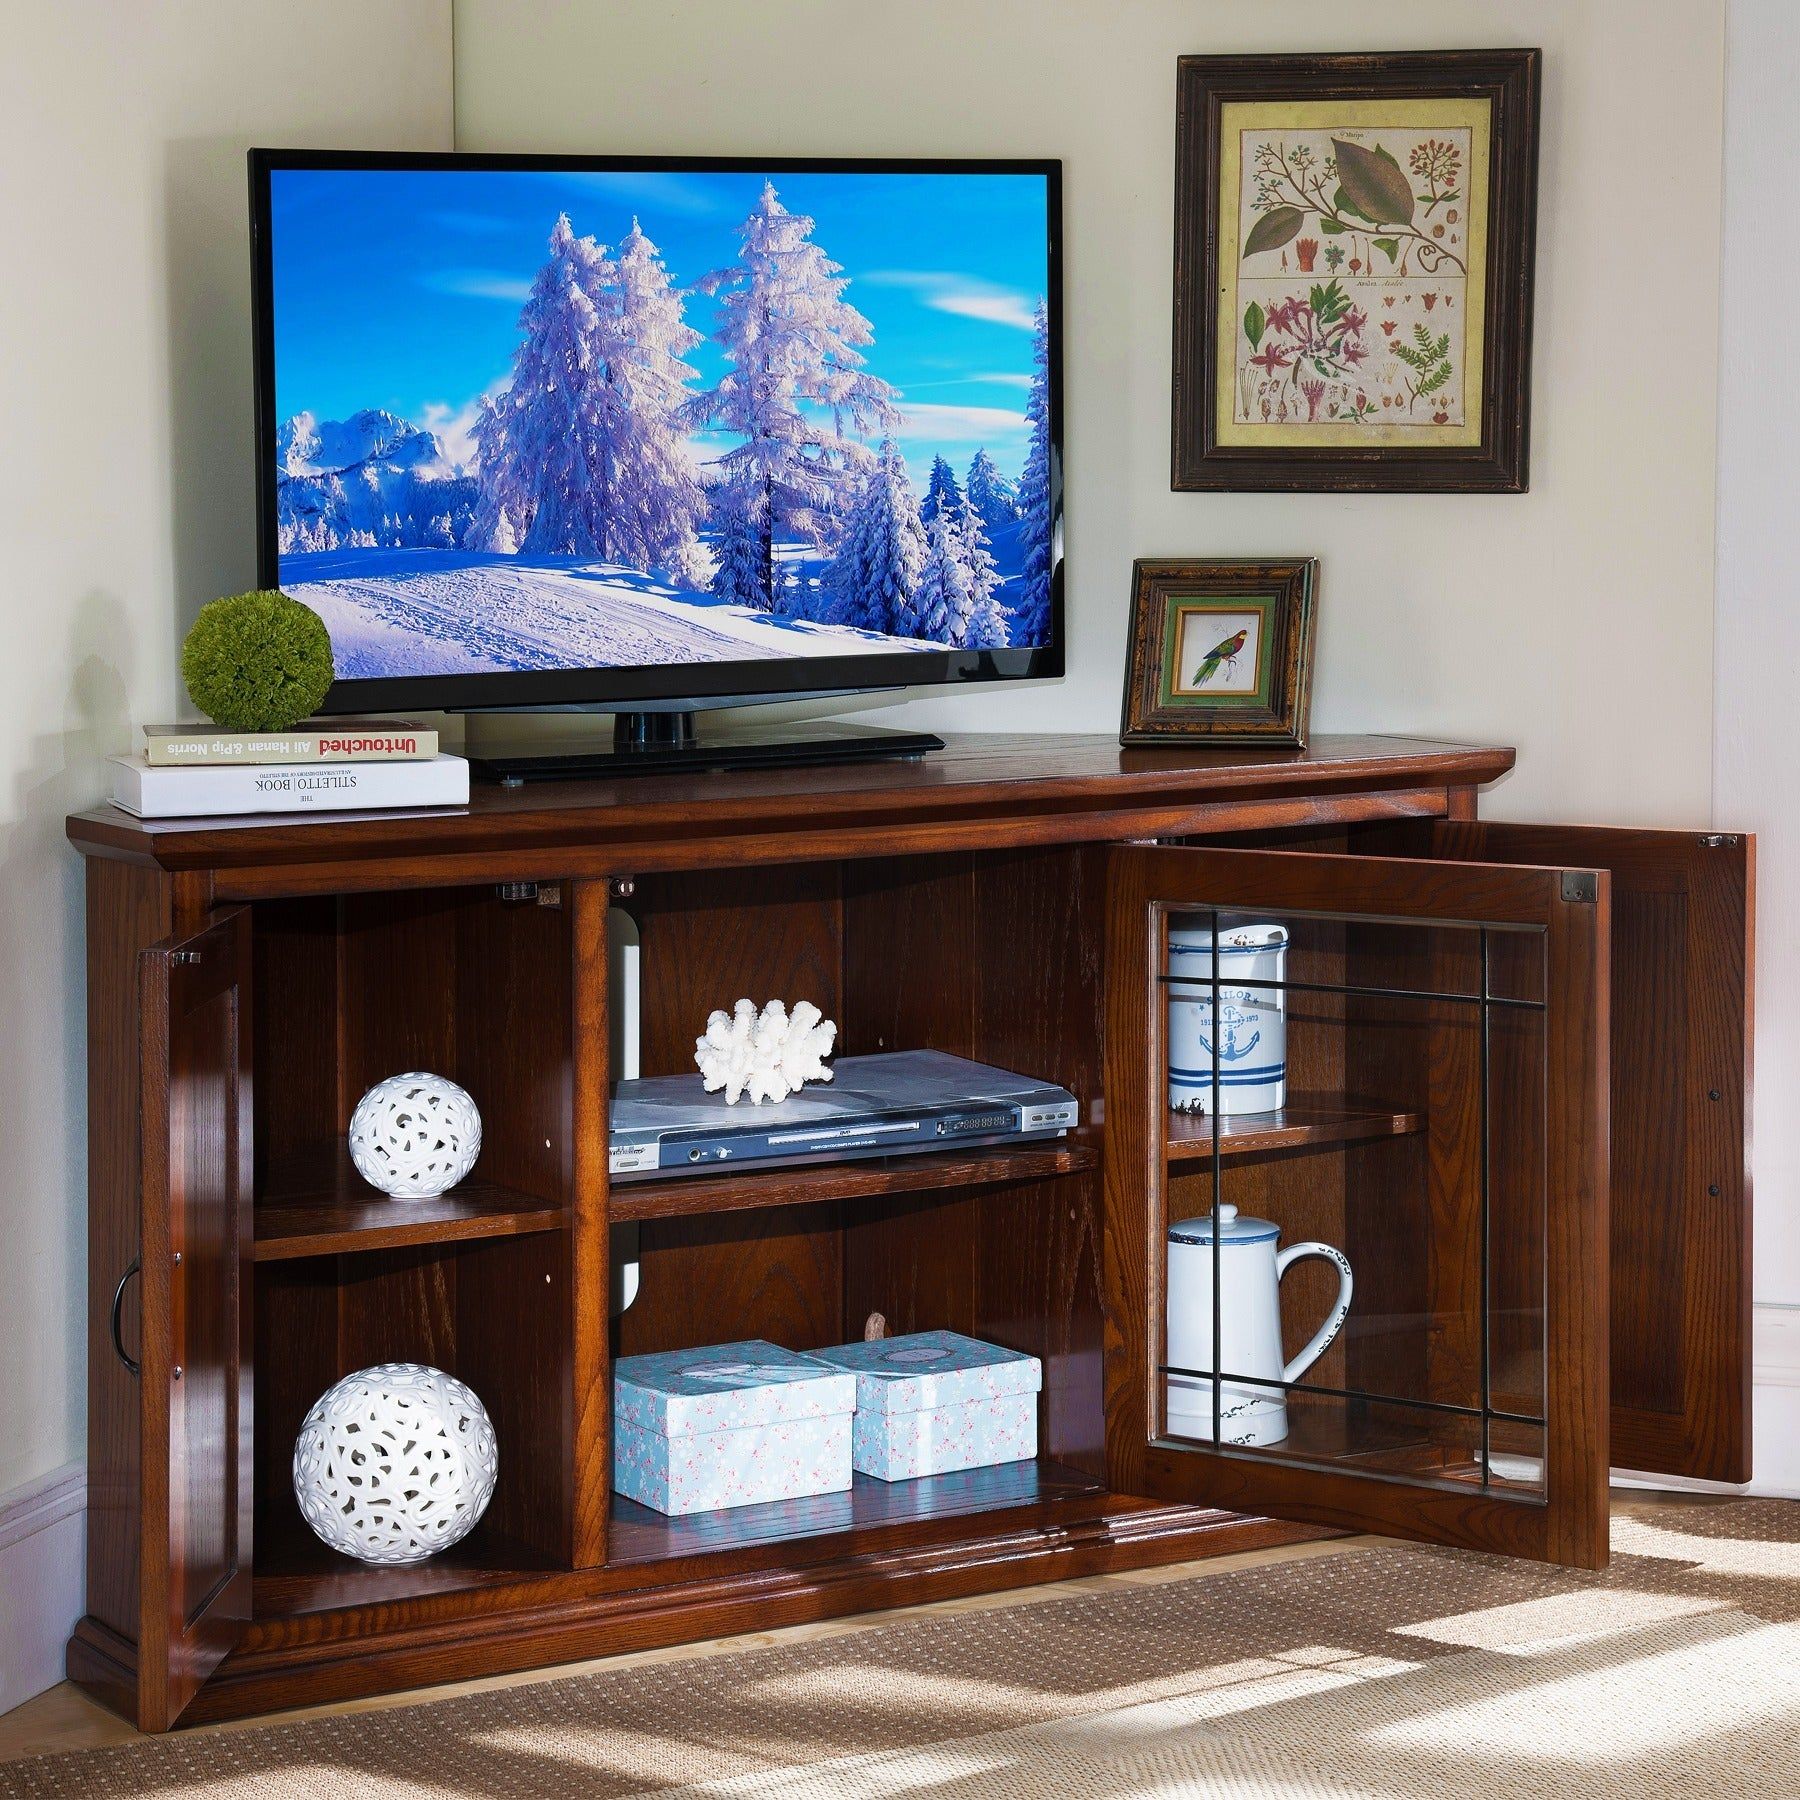 Burnished Oak 50 Inch Tv Stand And Media Corner Console Inside Tv Stands For 50 Inch Tvs (View 2 of 15)